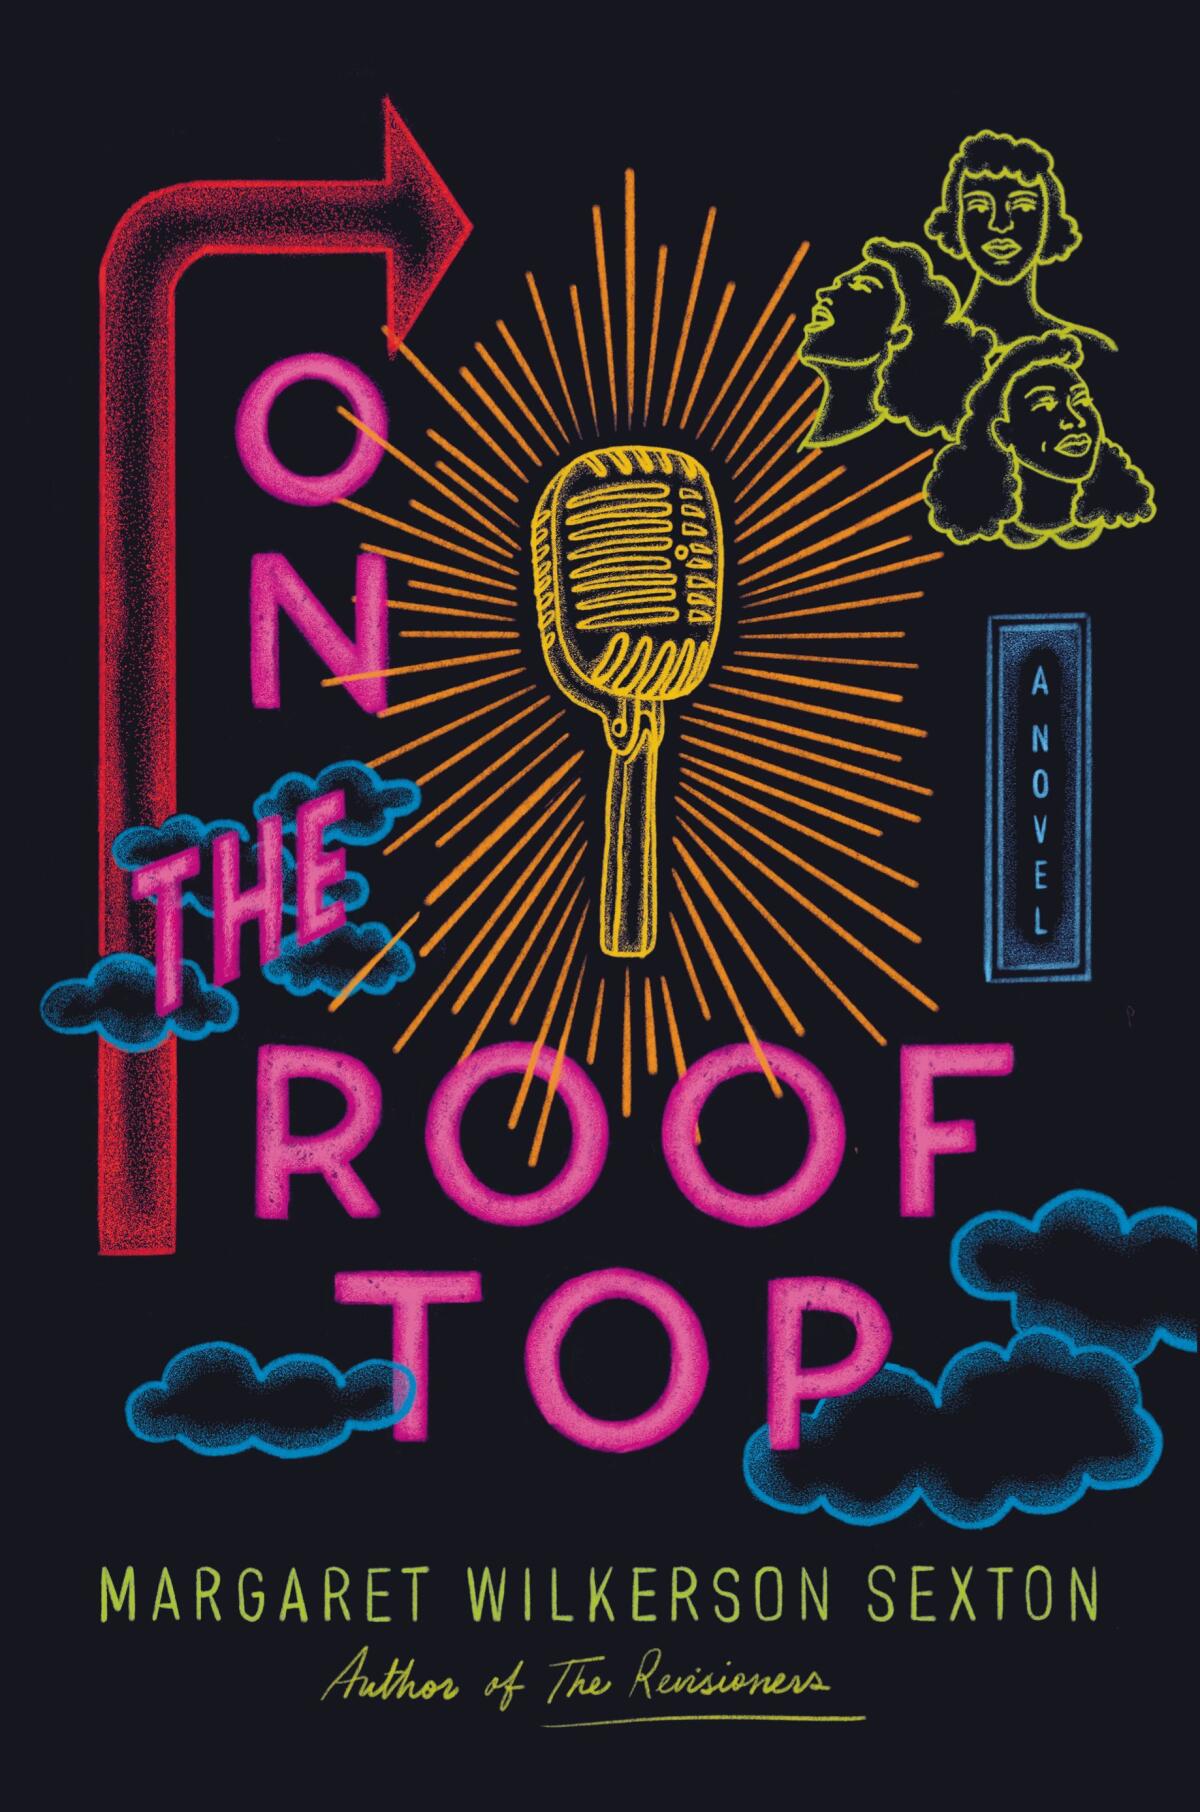 "On the Rooftop" by Margaret Wilkerson Sexton